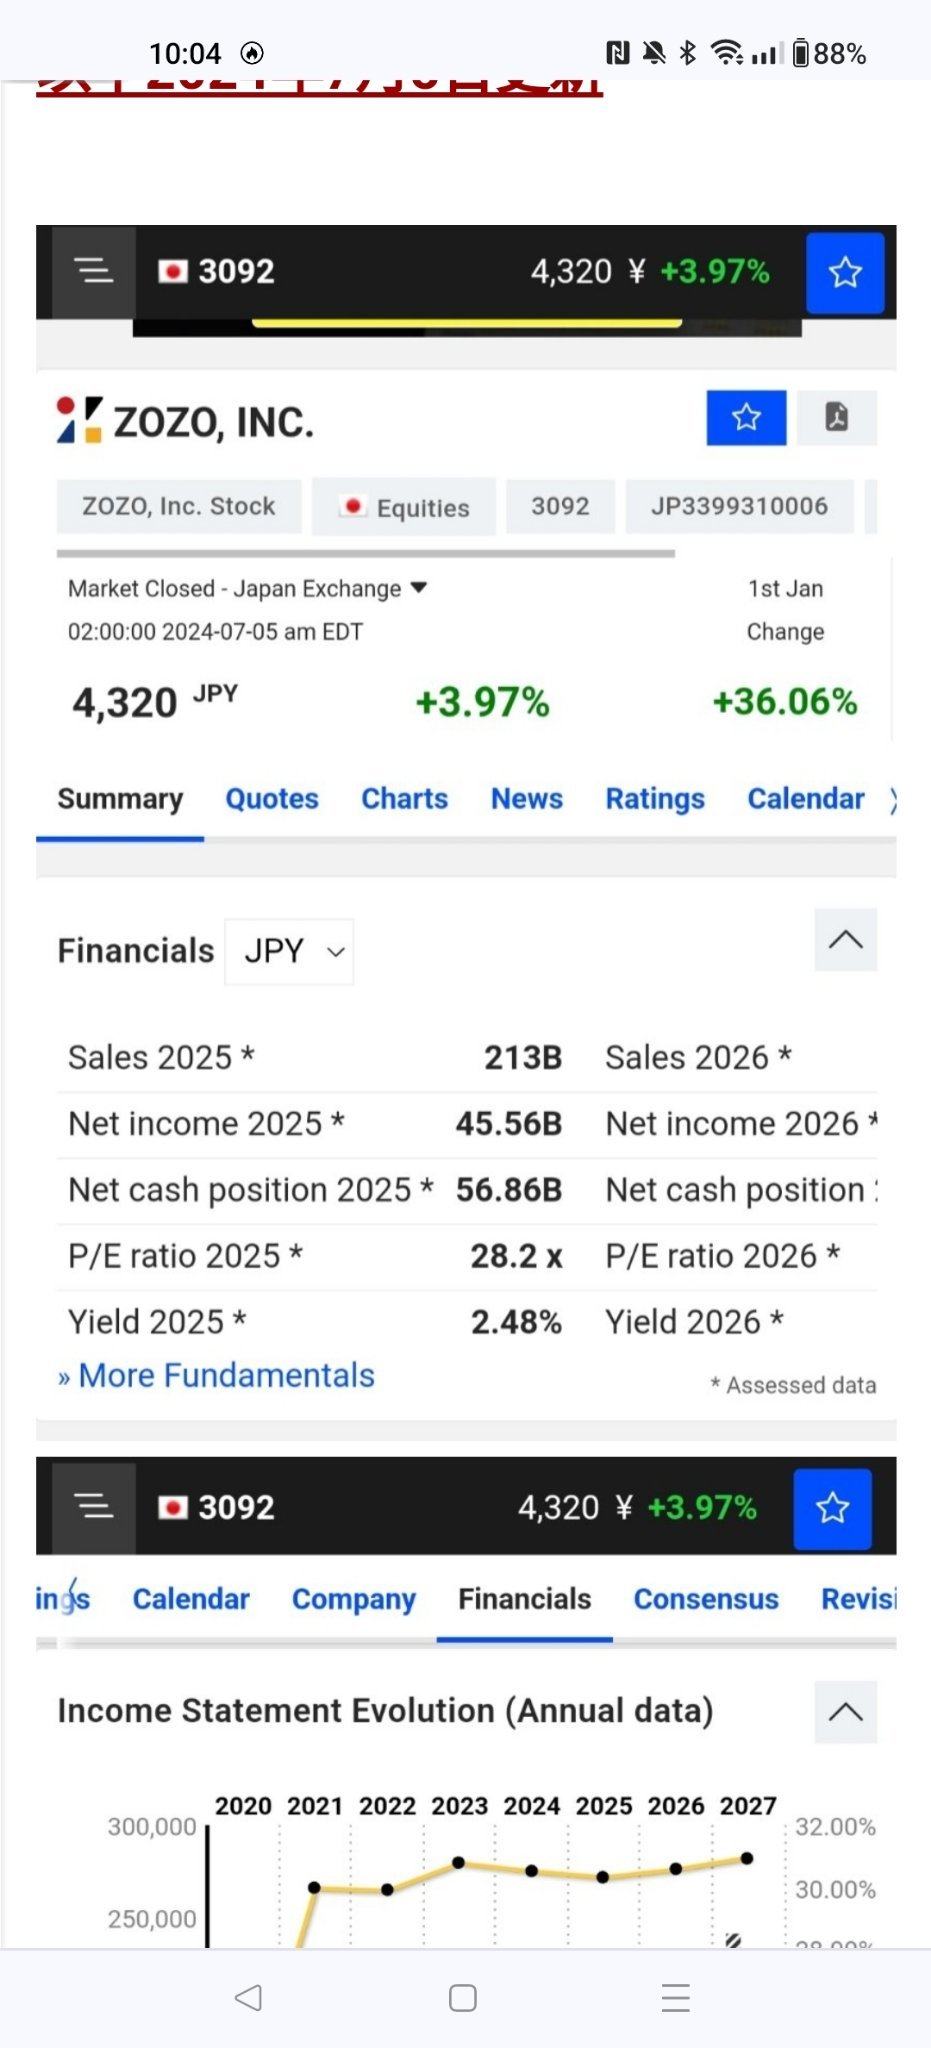 $Zozo (3092.JP)$ 28.2 times the expected PER for the 2025 fiscal year Net profit margin for fiscal year 2026 21.36% ROE 55% (Figures are excerpted from the arti...